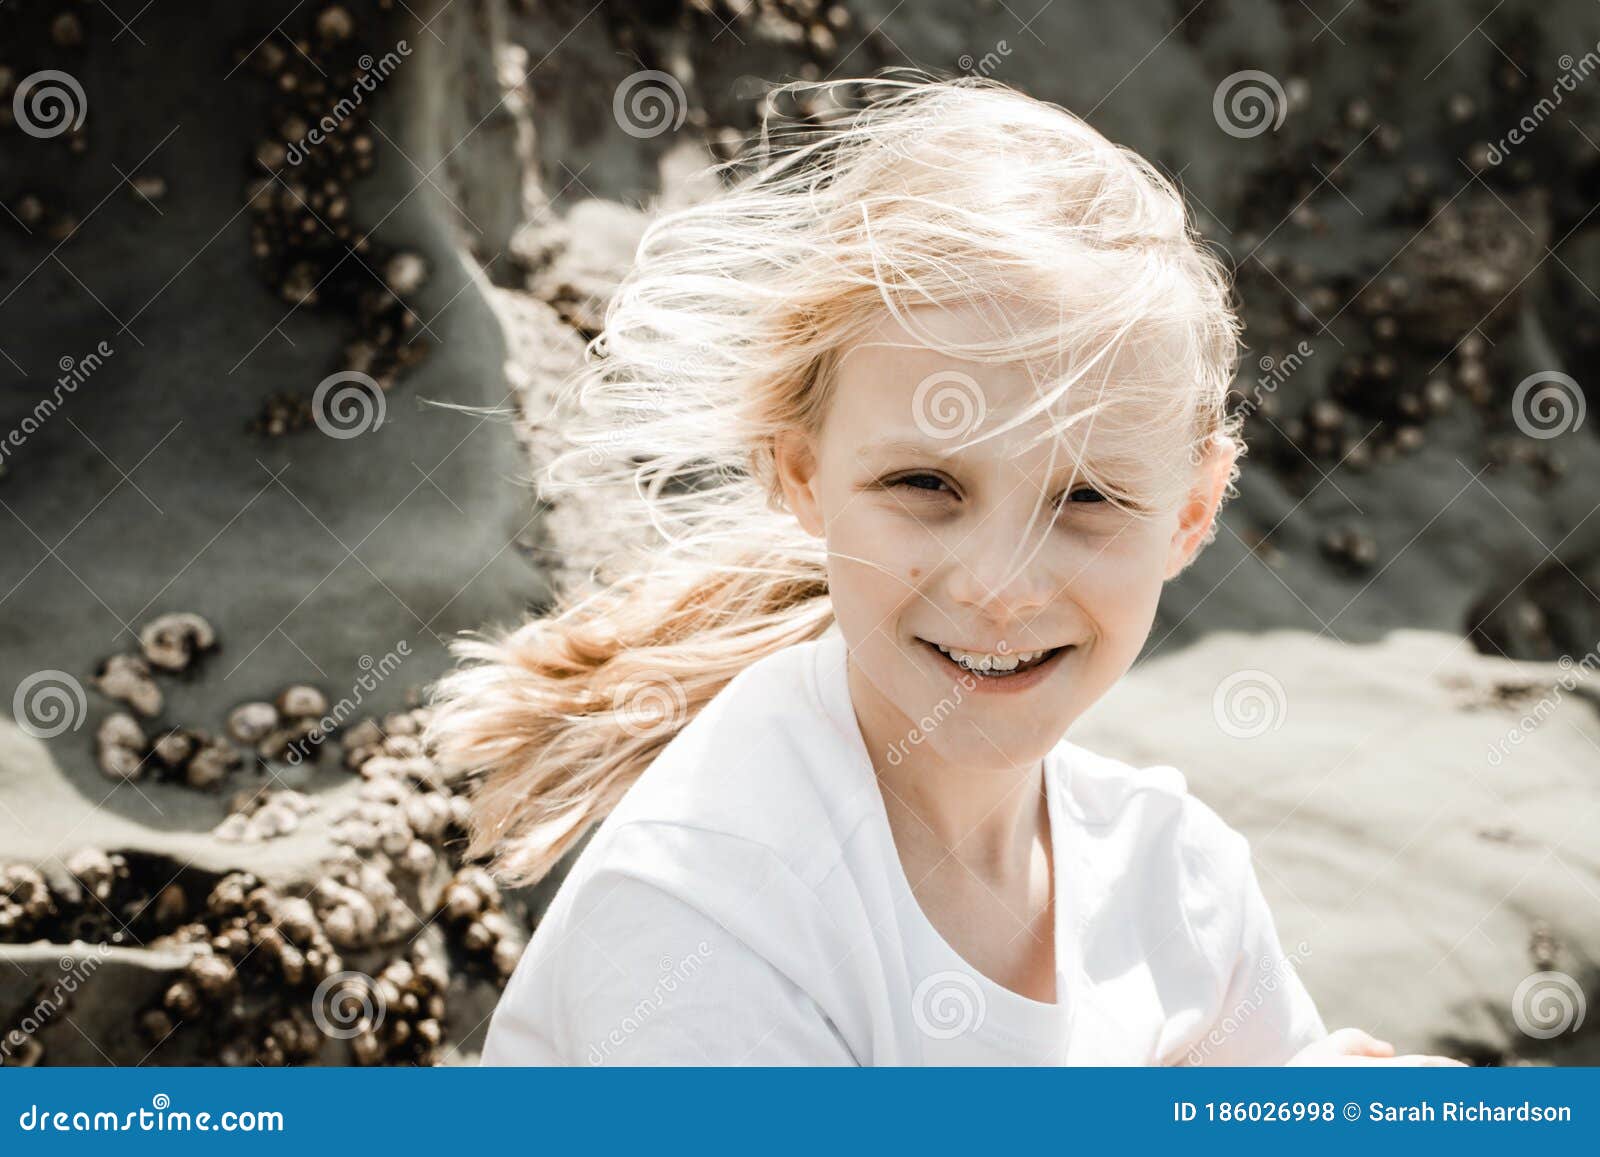 Young Girl with Wind Swept Blond Hair Stock Photo - Image of model ...